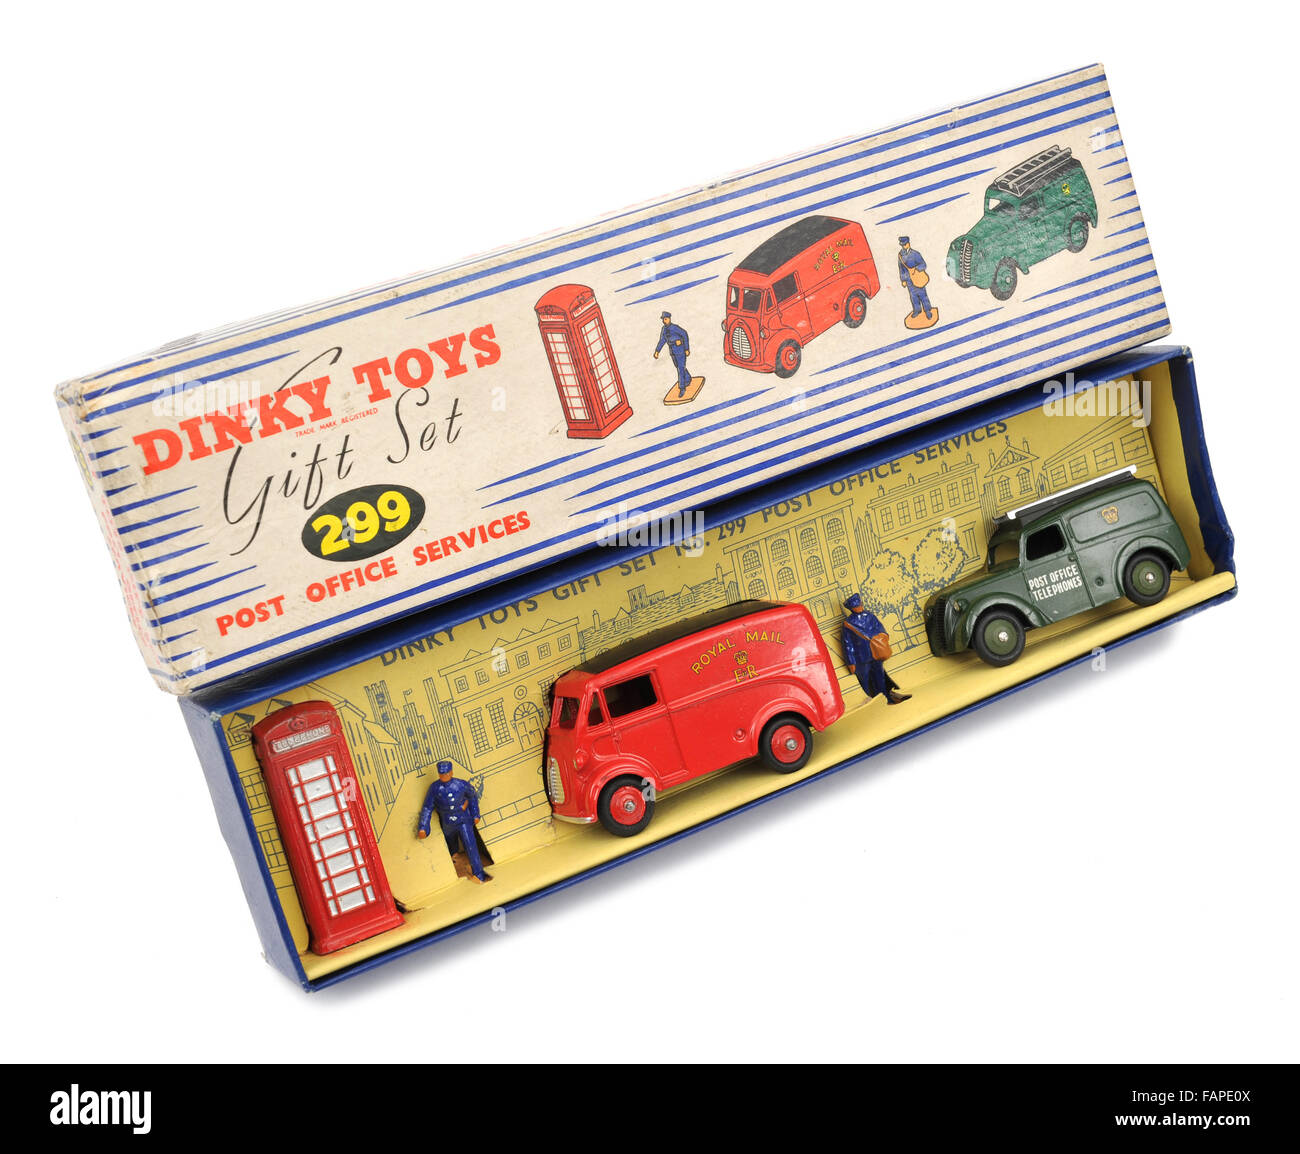 Children's Dinky Toys 299 Post Office Services Gift Set Stock Photo